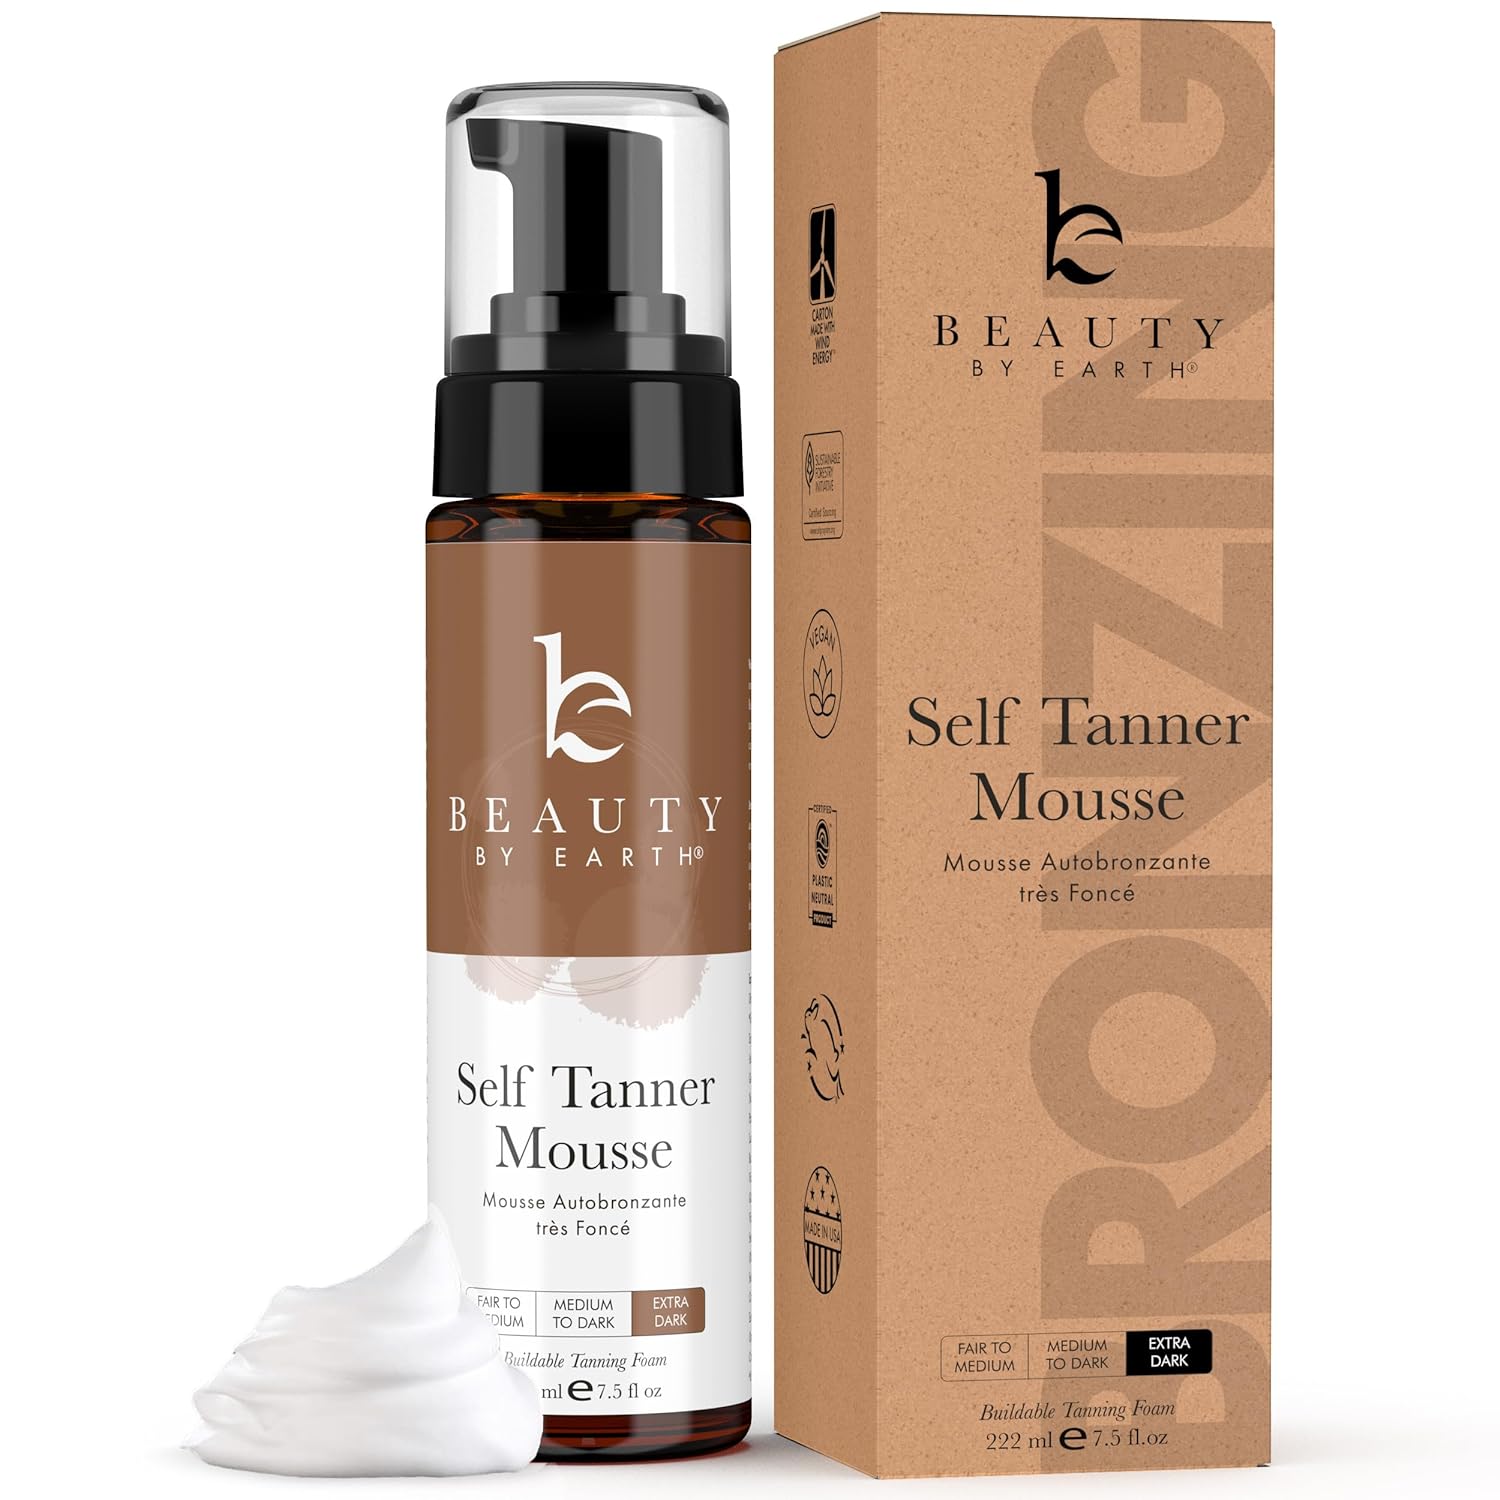 Self Tanner Tanning Mousse - Ultra Dark Self Tanner Mousse USA Made with Natural & Organic Ingredients, Self Tanning Foam for Fake Tan or Self Tan Foam, Self Tanners Best Sellers